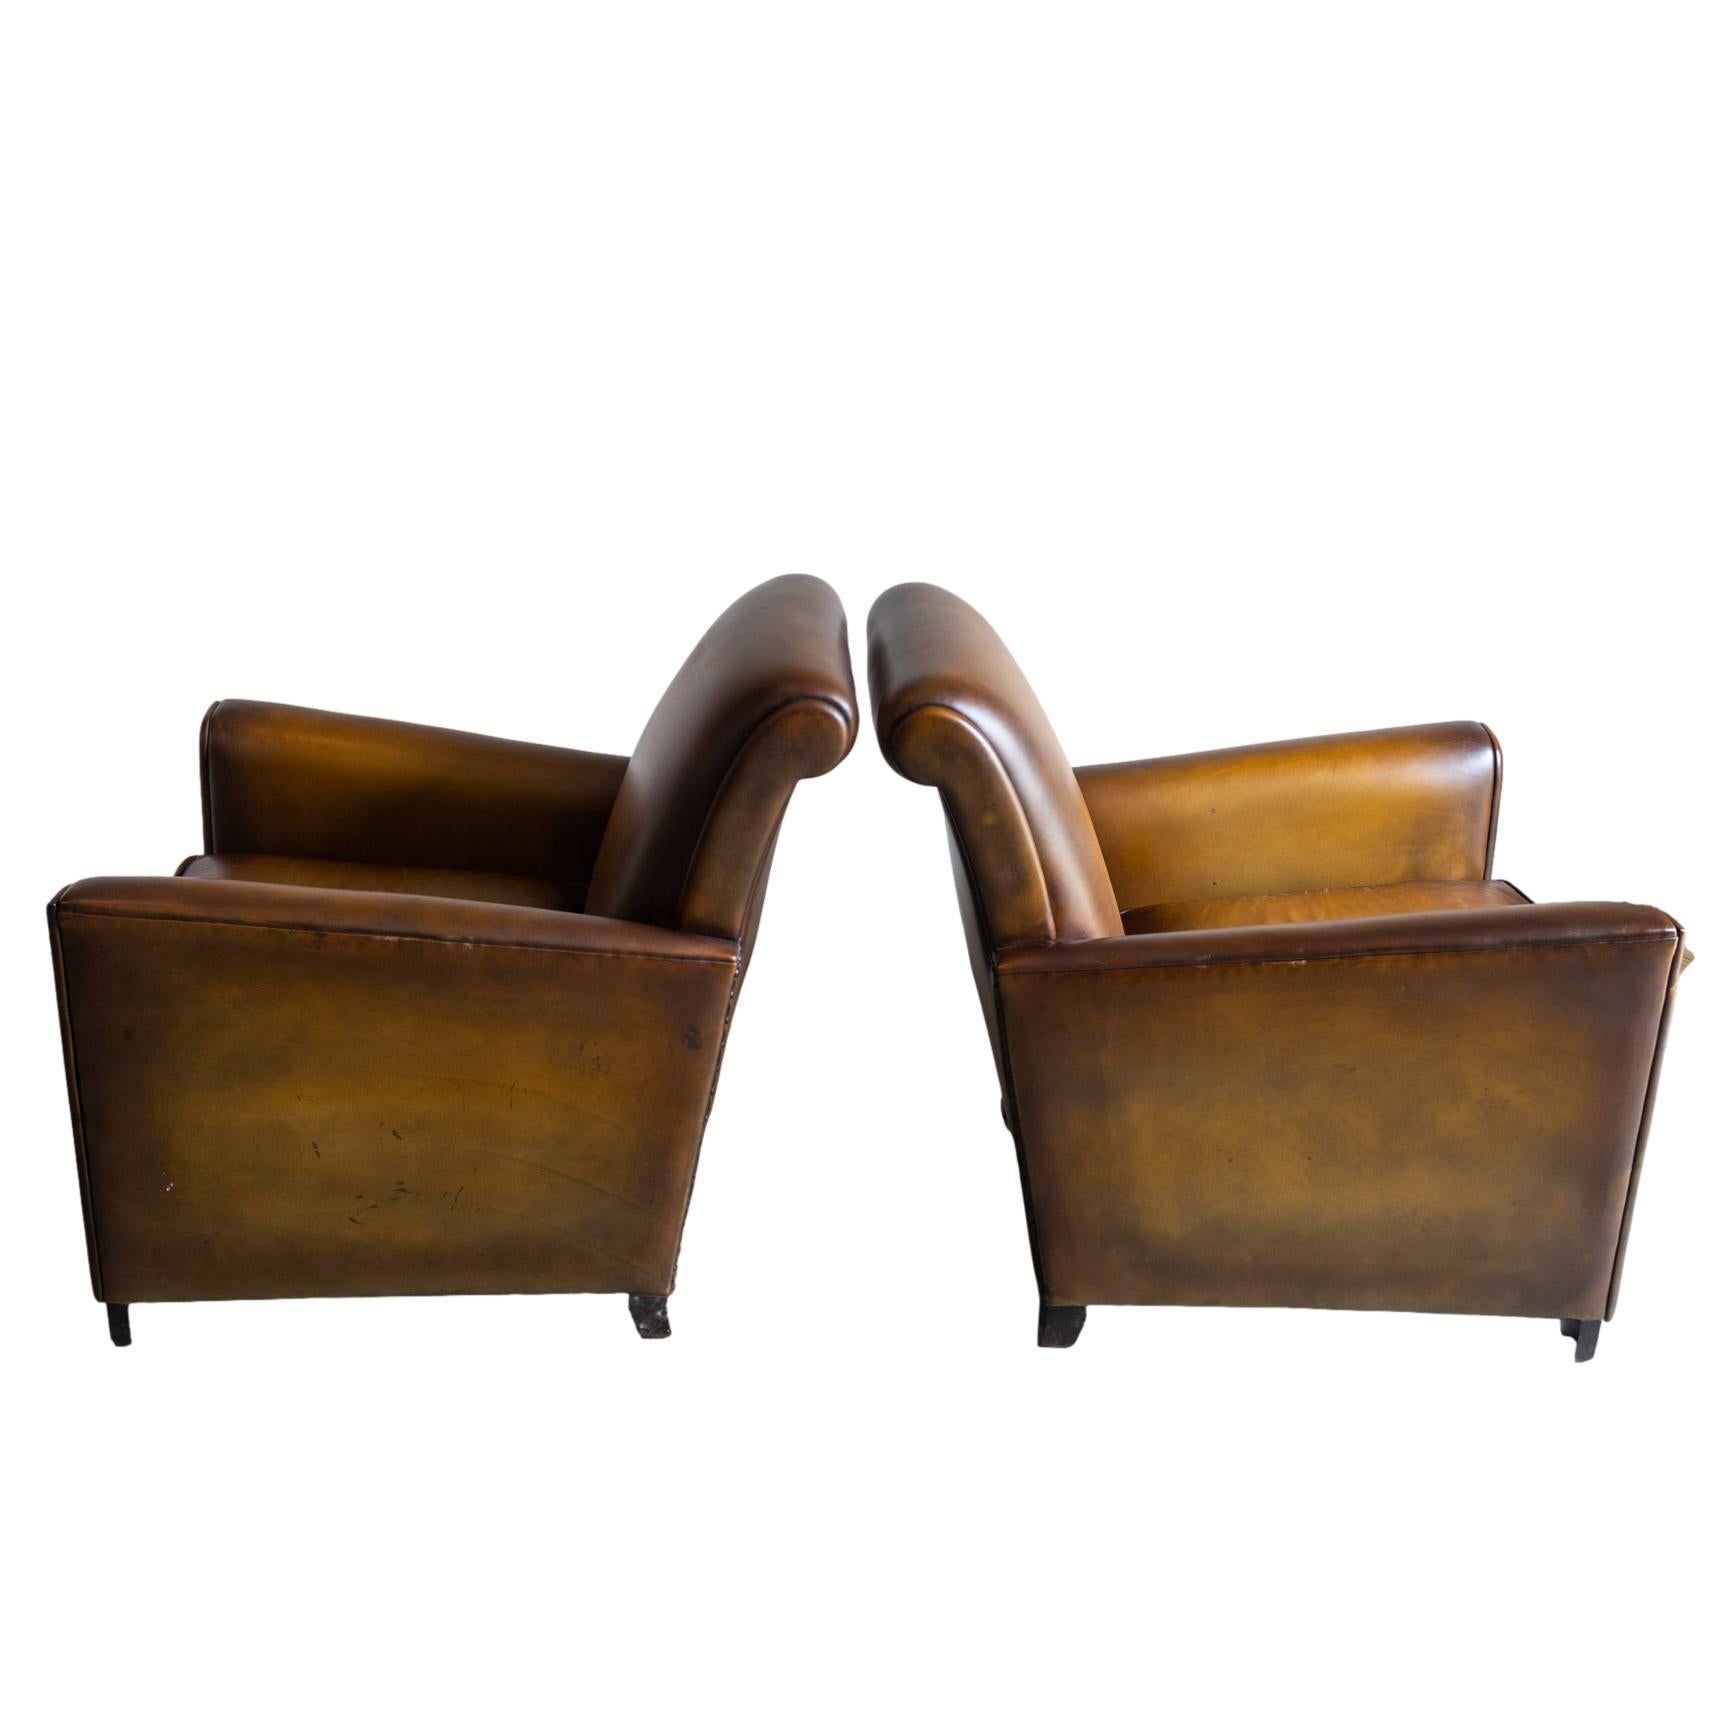 Mid-20th Century A Pair of Art Deco Leather Club Chairs, French, ca. 1935 For Sale